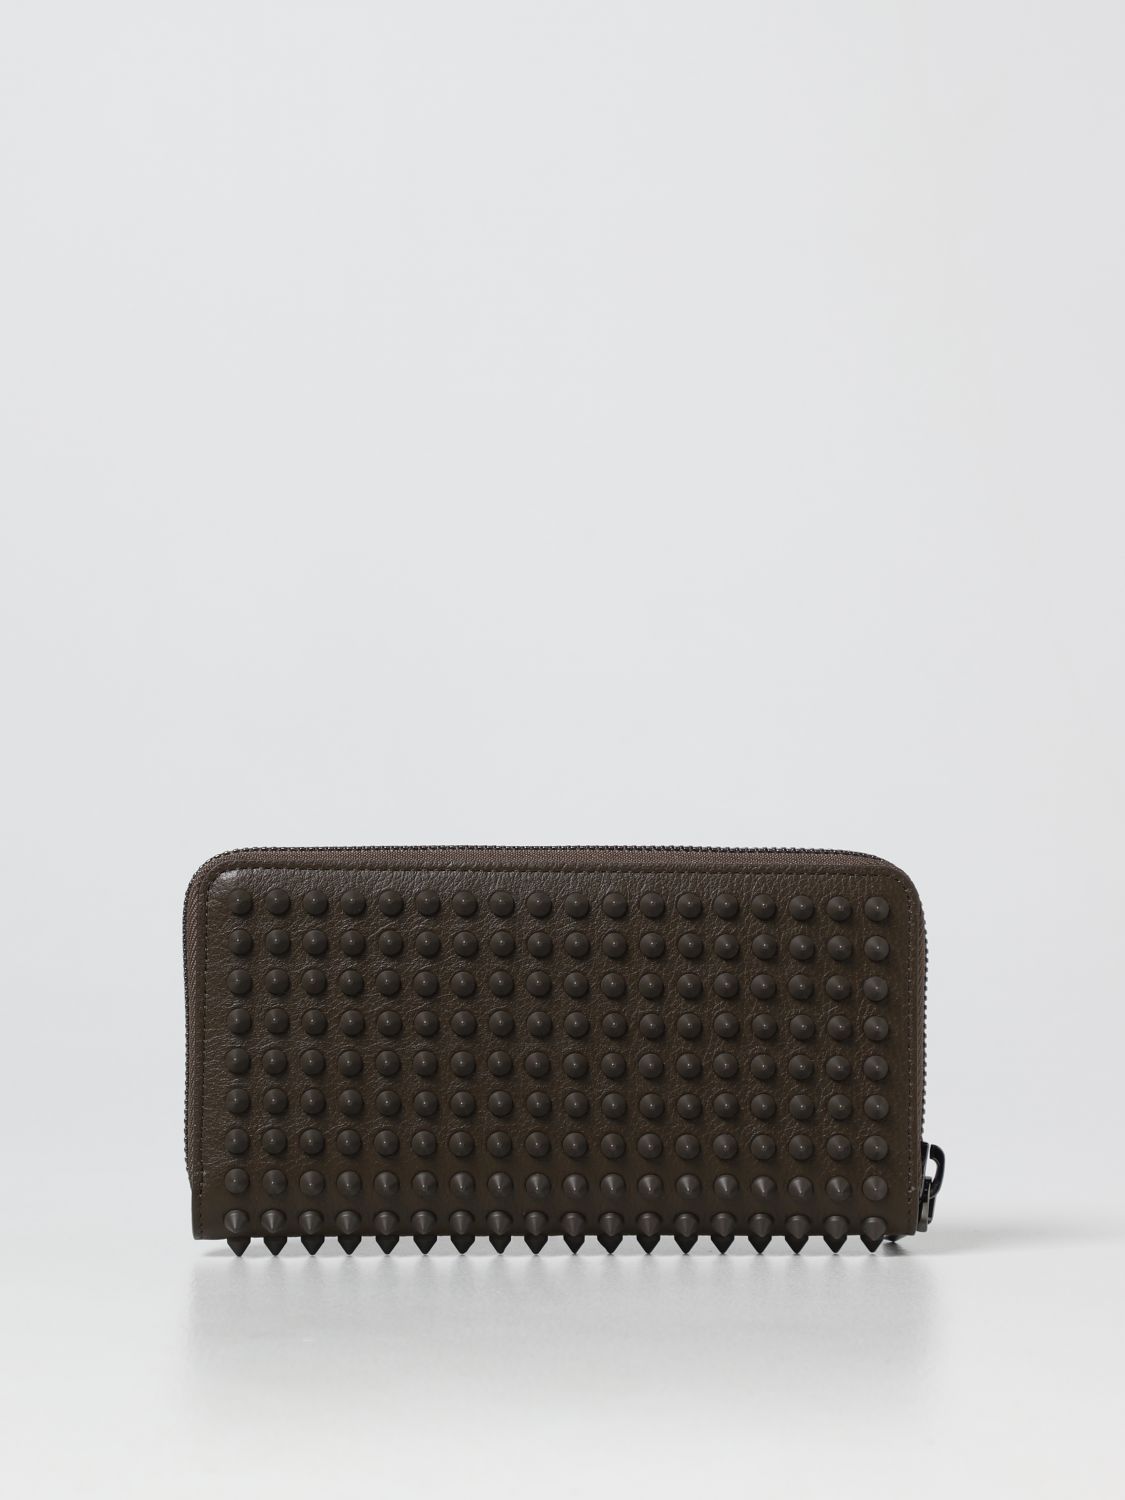 Wallet Christian Louboutin: Christian Louboutin Panettone leather wallet with studs military 3